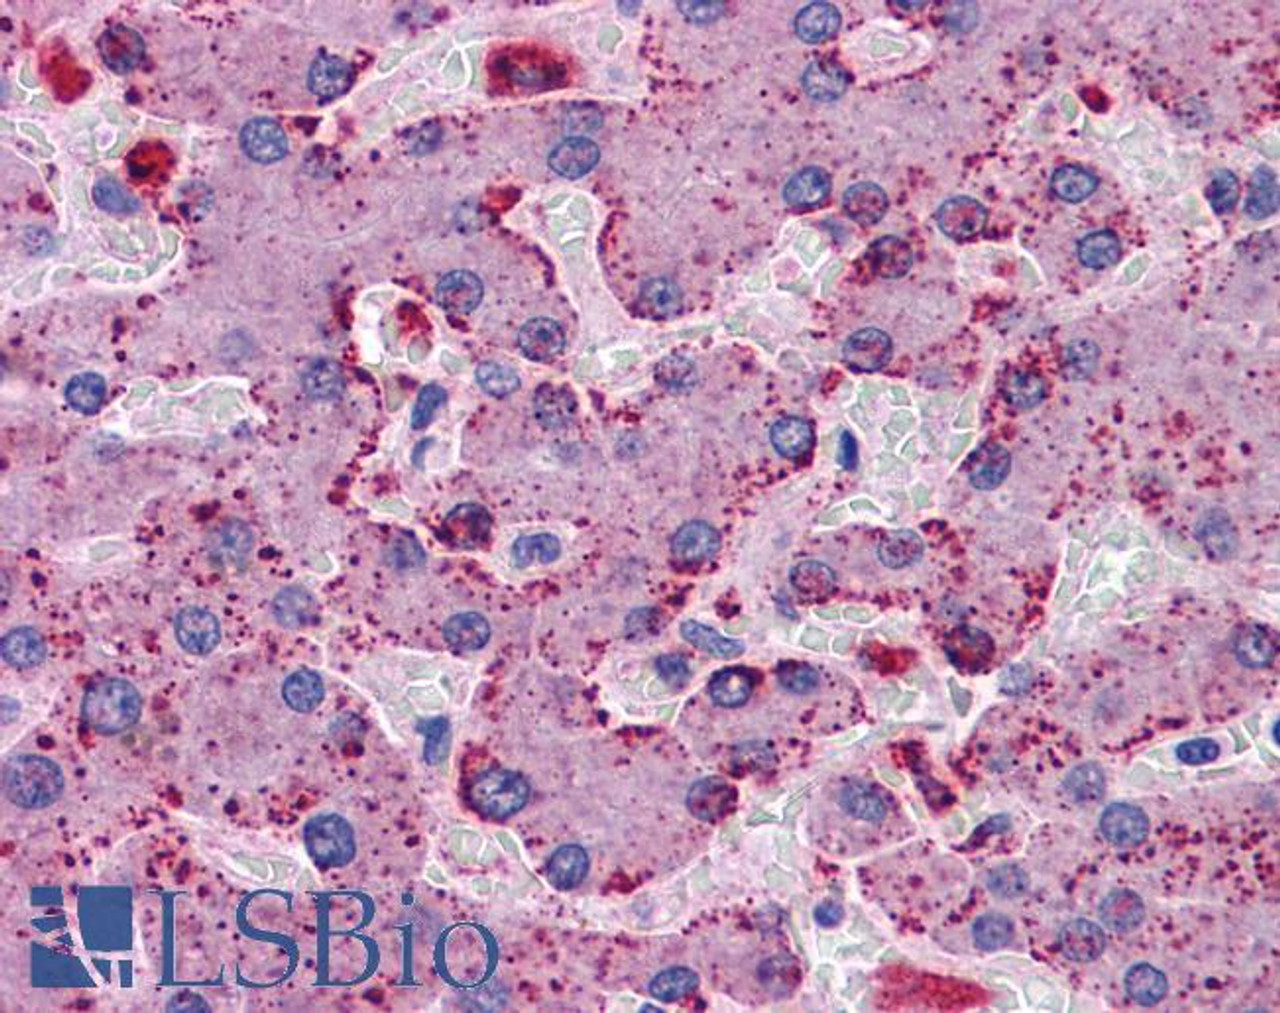 46-226 (3.75ug/ml) staining of paraffin embedded Human Cerebellum. Steamed antigen retrieval with citrate buffer pH 6, AP-staining.